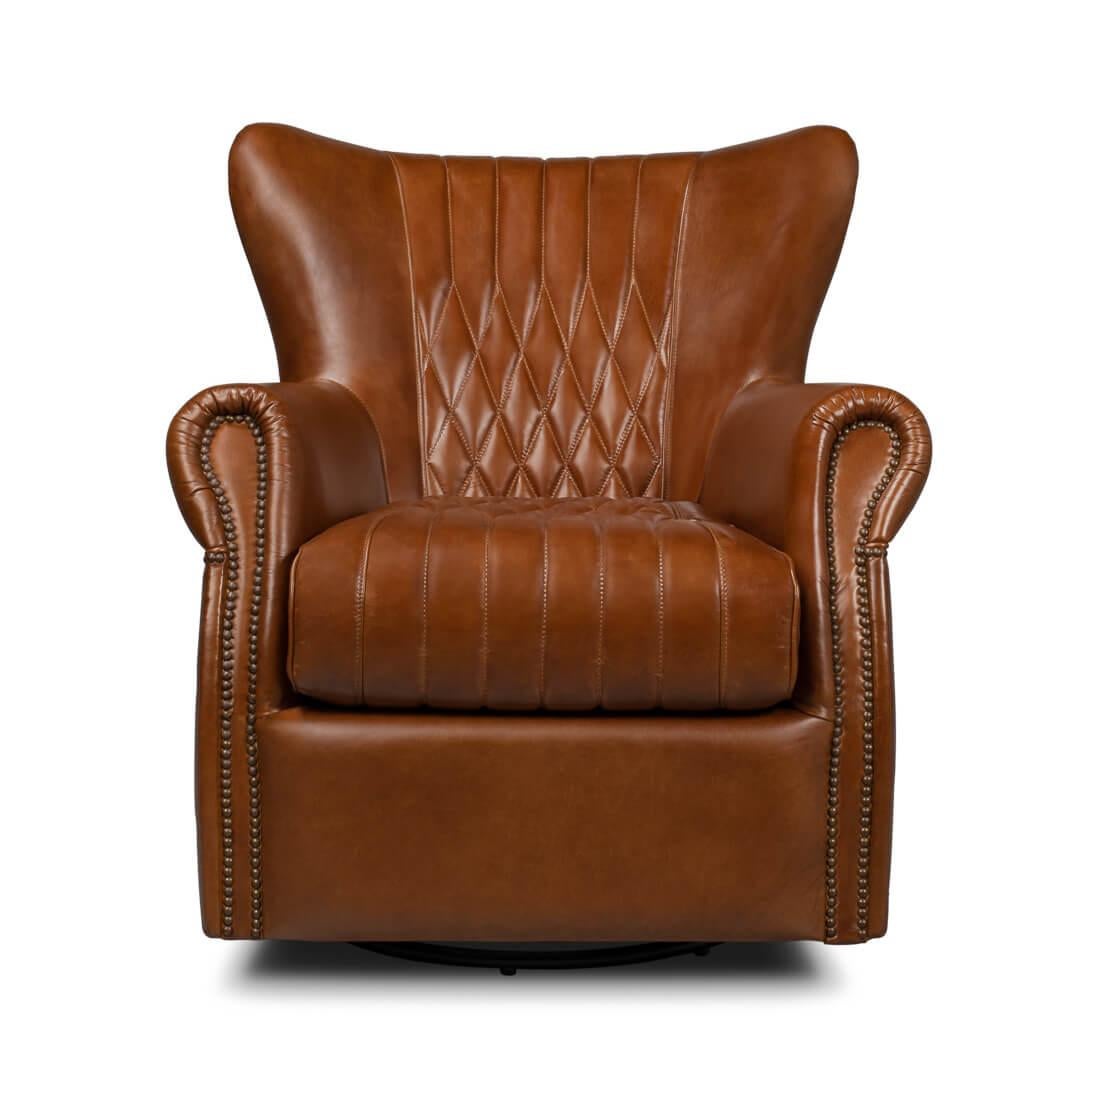 A masterpiece that encapsulates timeless charm and contemporary comfort. Crafted with high-quality Cuba Brown leather, it boasts iconic diamond quilting and channels that bring an air of aristocratic elegance to any room.

With a high winged